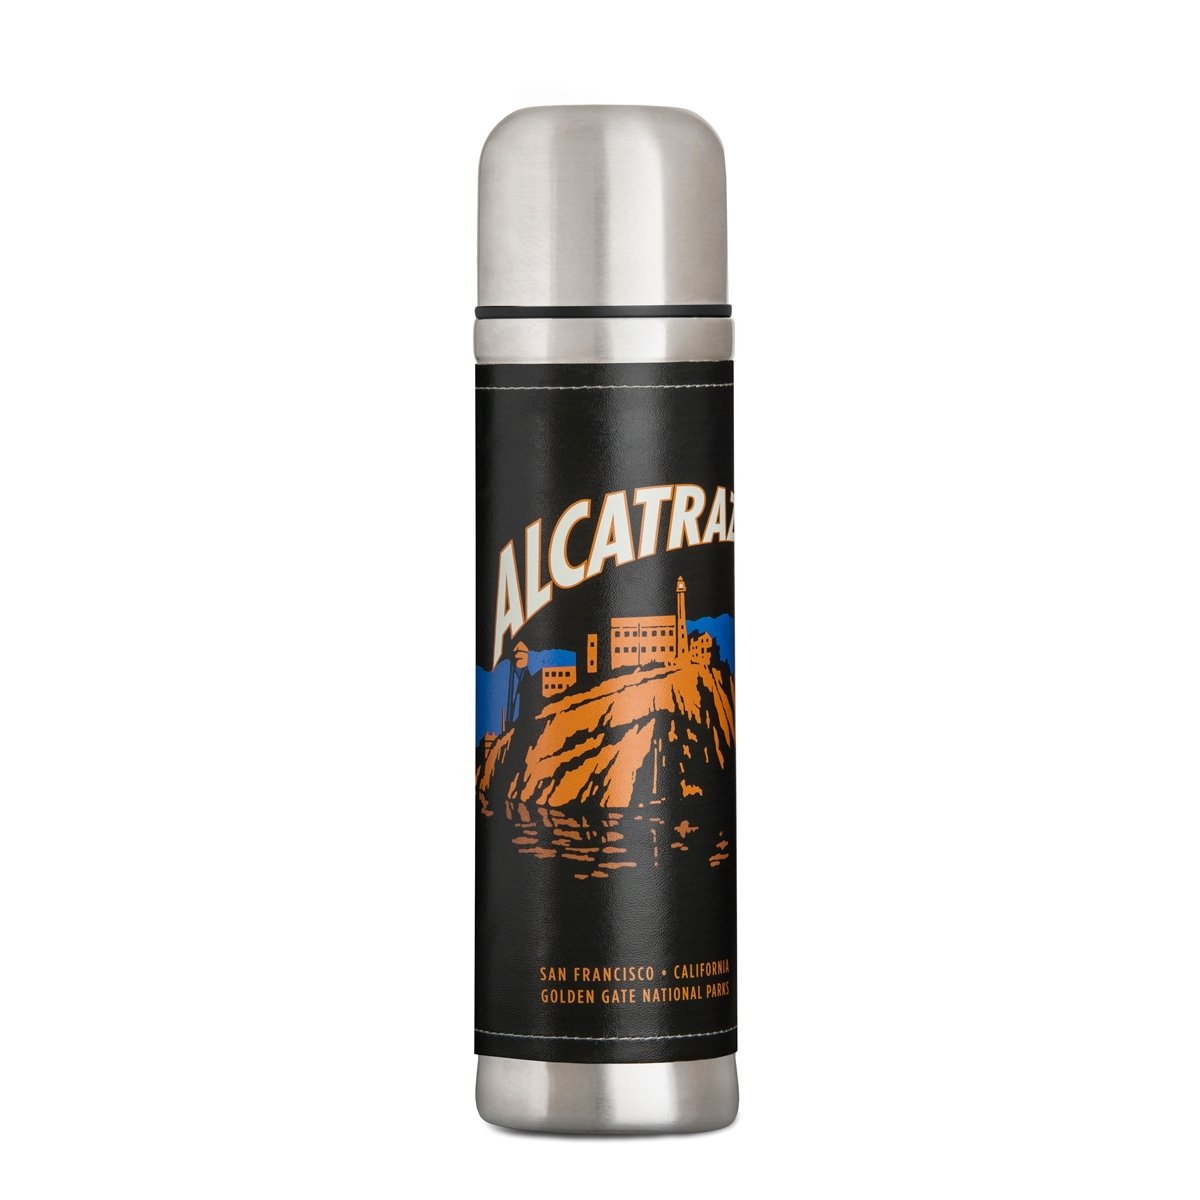 Stainless steel thermos with multicolor printed sleeve, featuring dramatic illustration of Alcatraz at night and text "Alcatraz San Francisco California Golden Gate National Parks" on black background.